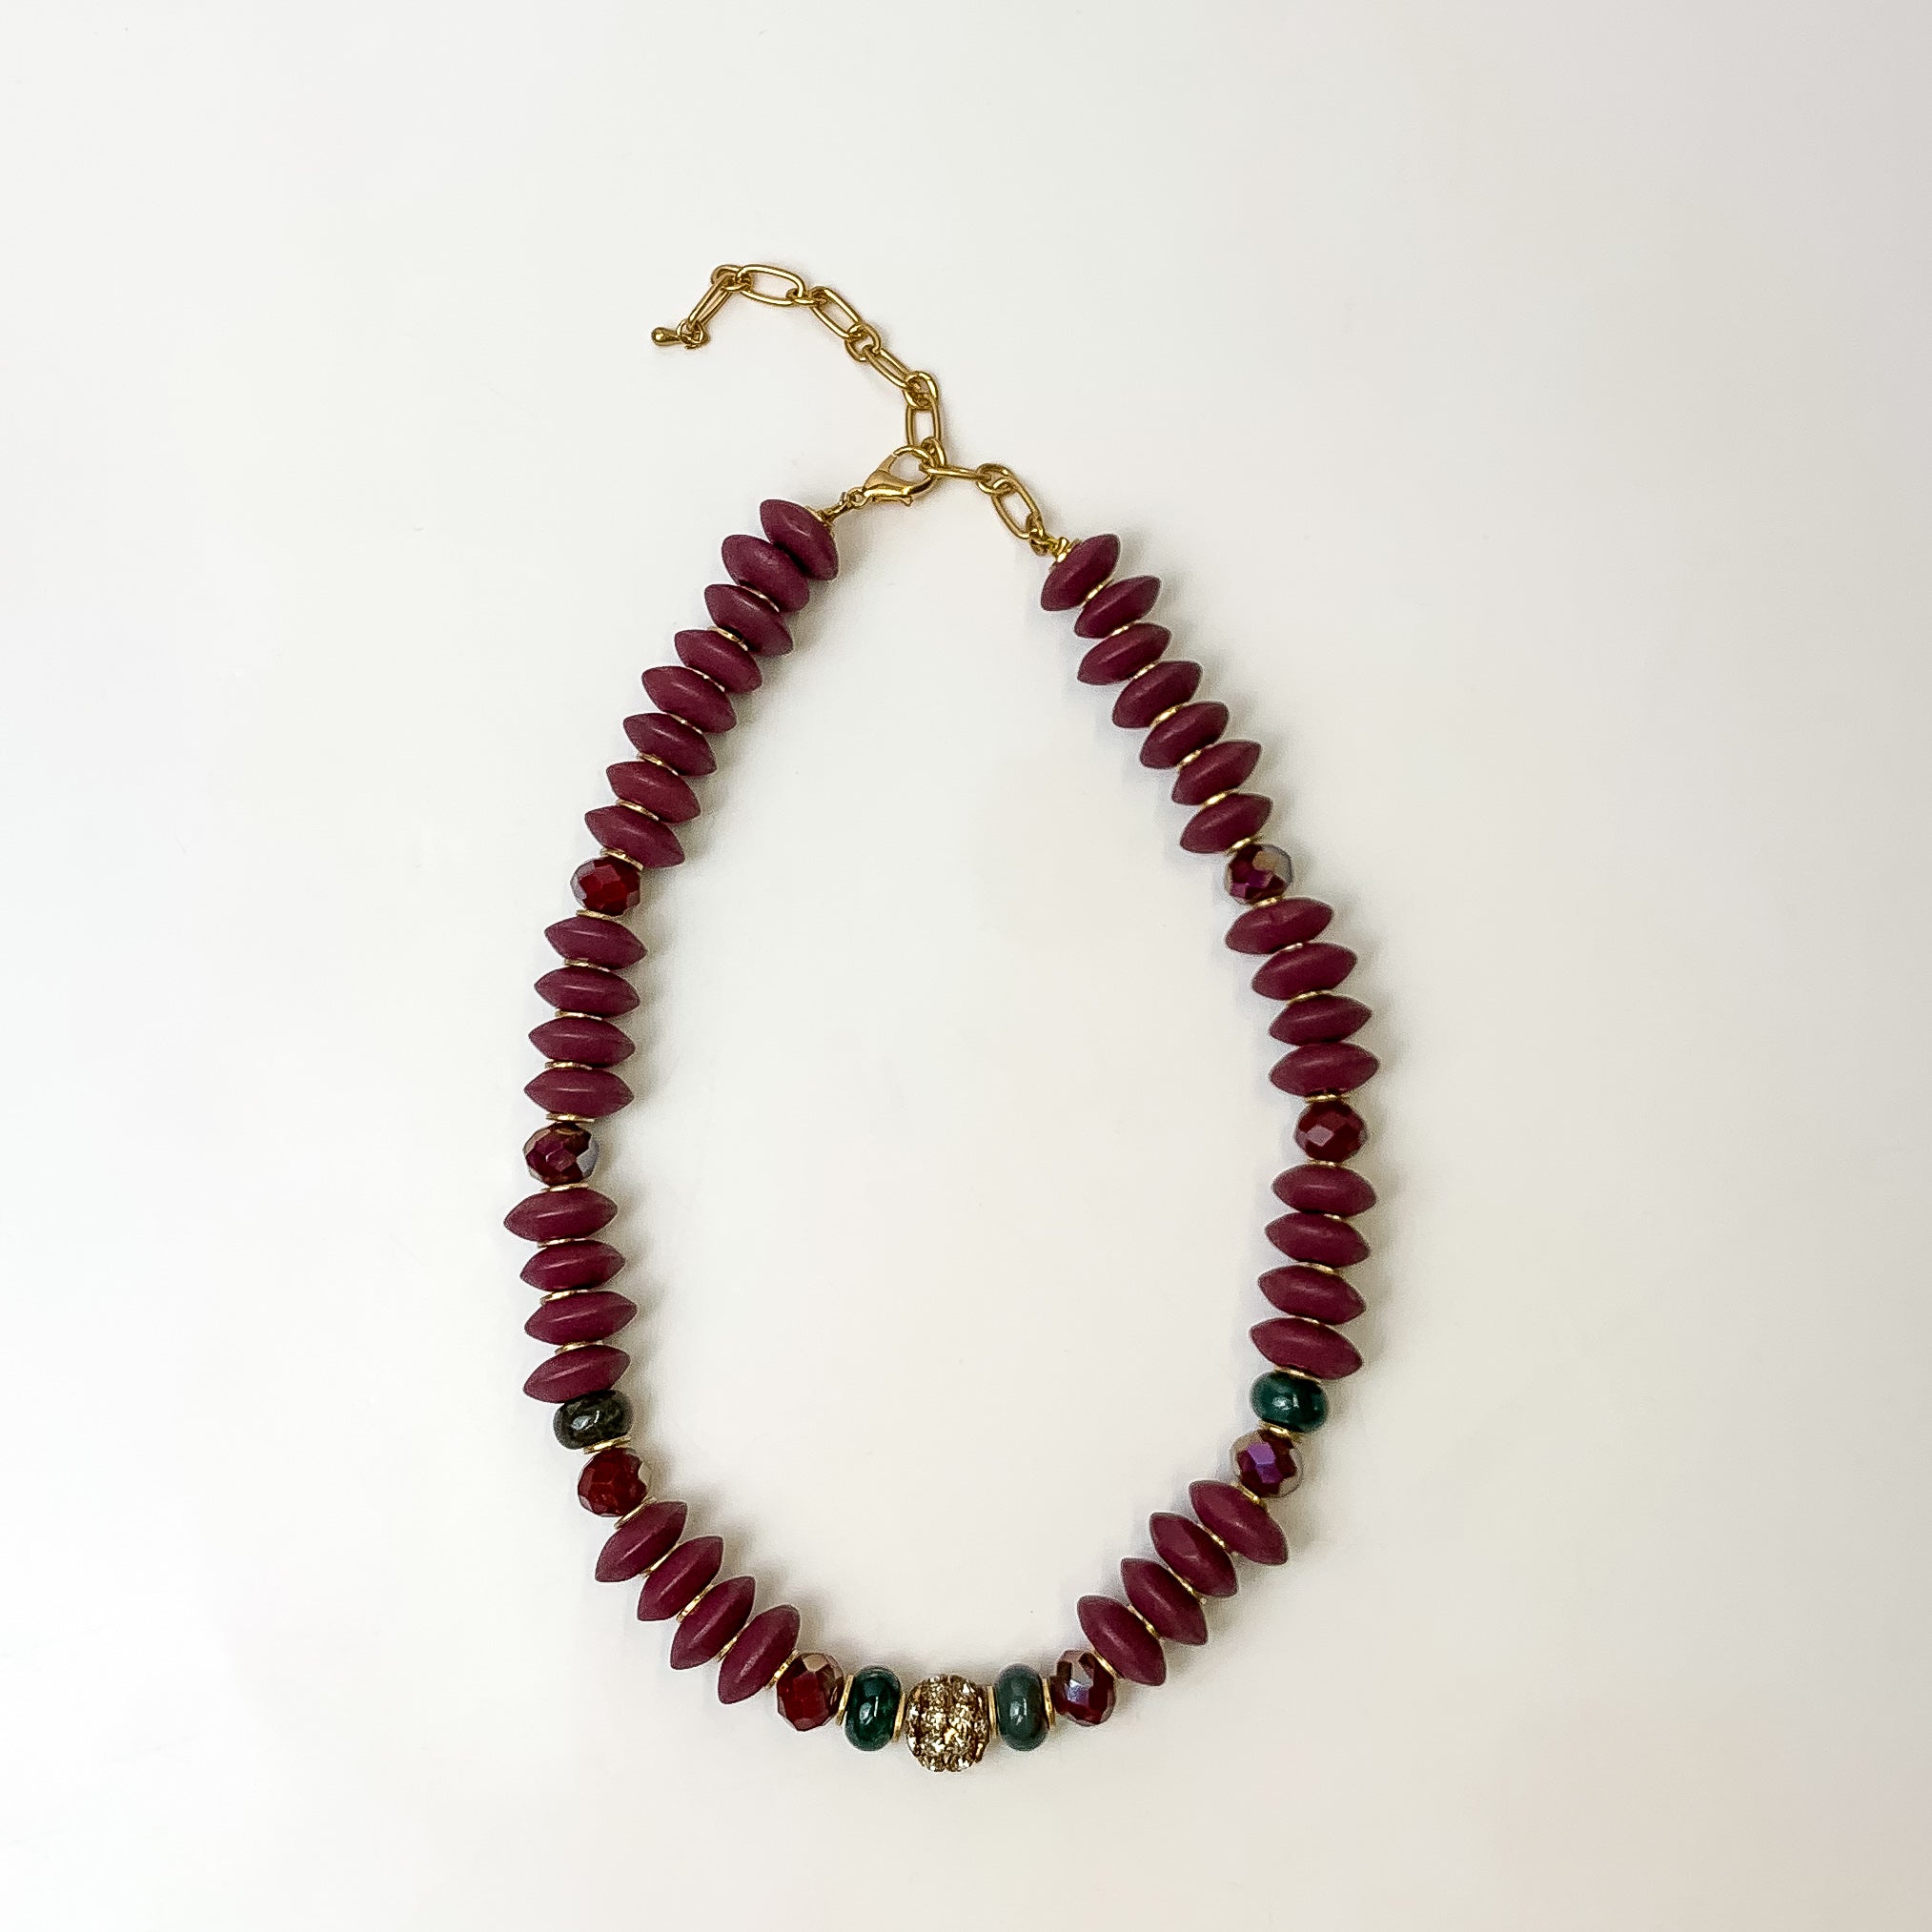 This beaded necklace in Mulberry purple is placed down on a white background.